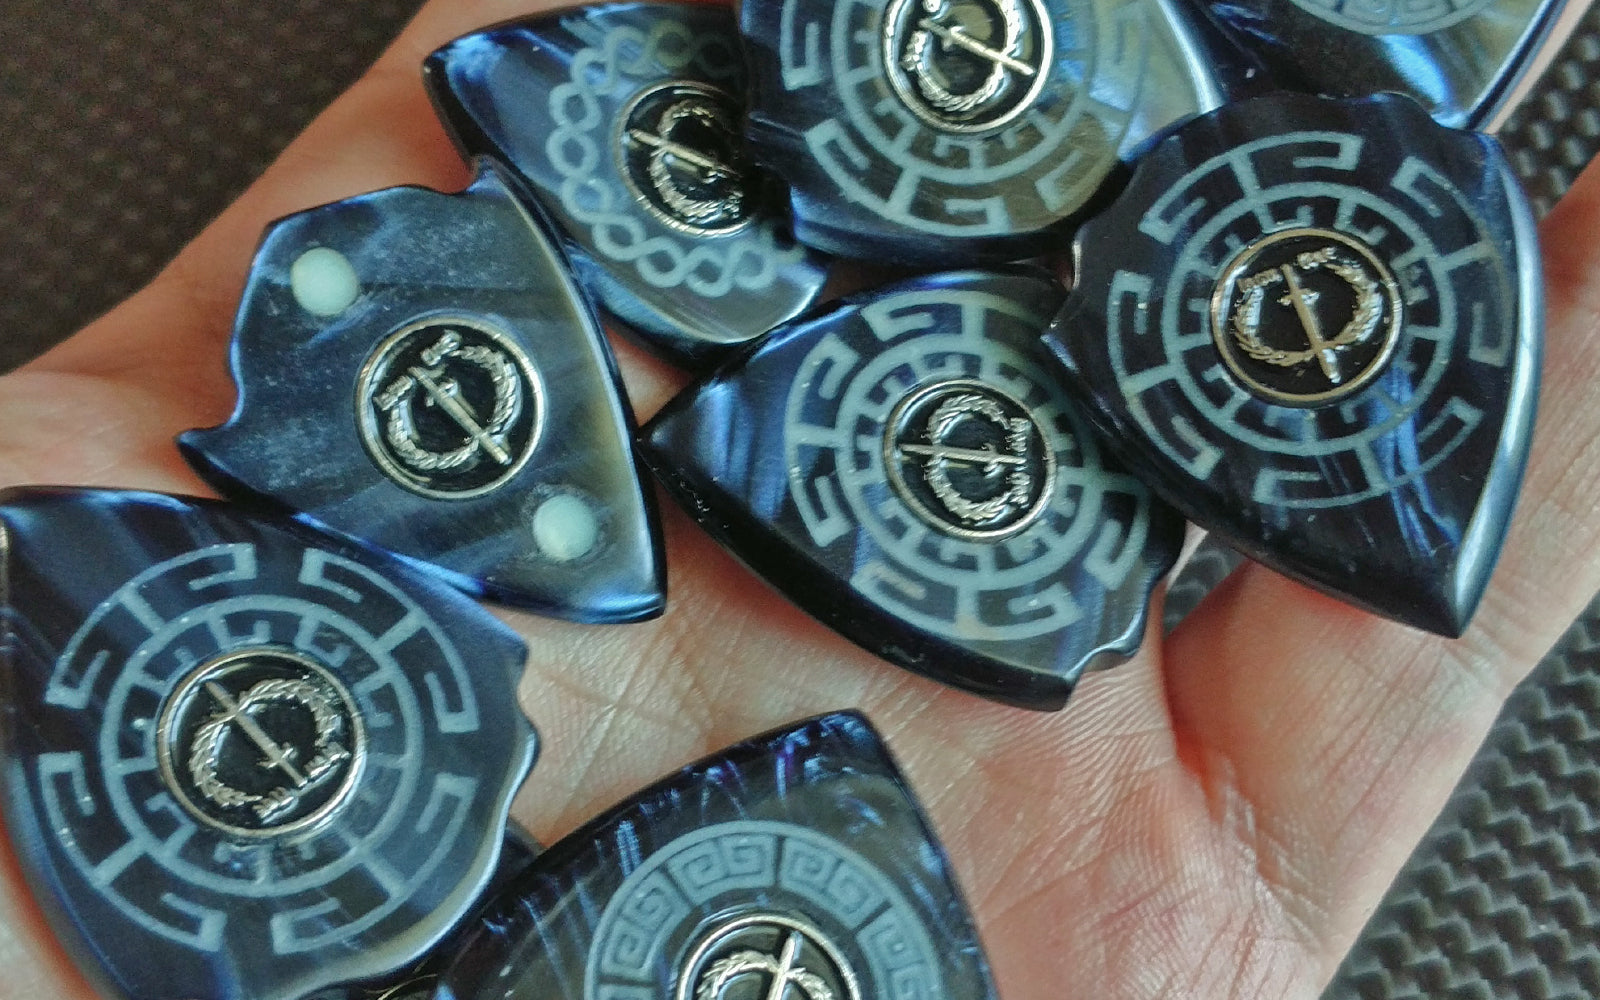 The NEW Imperial Series Guitar Picks - acrylic plectrums